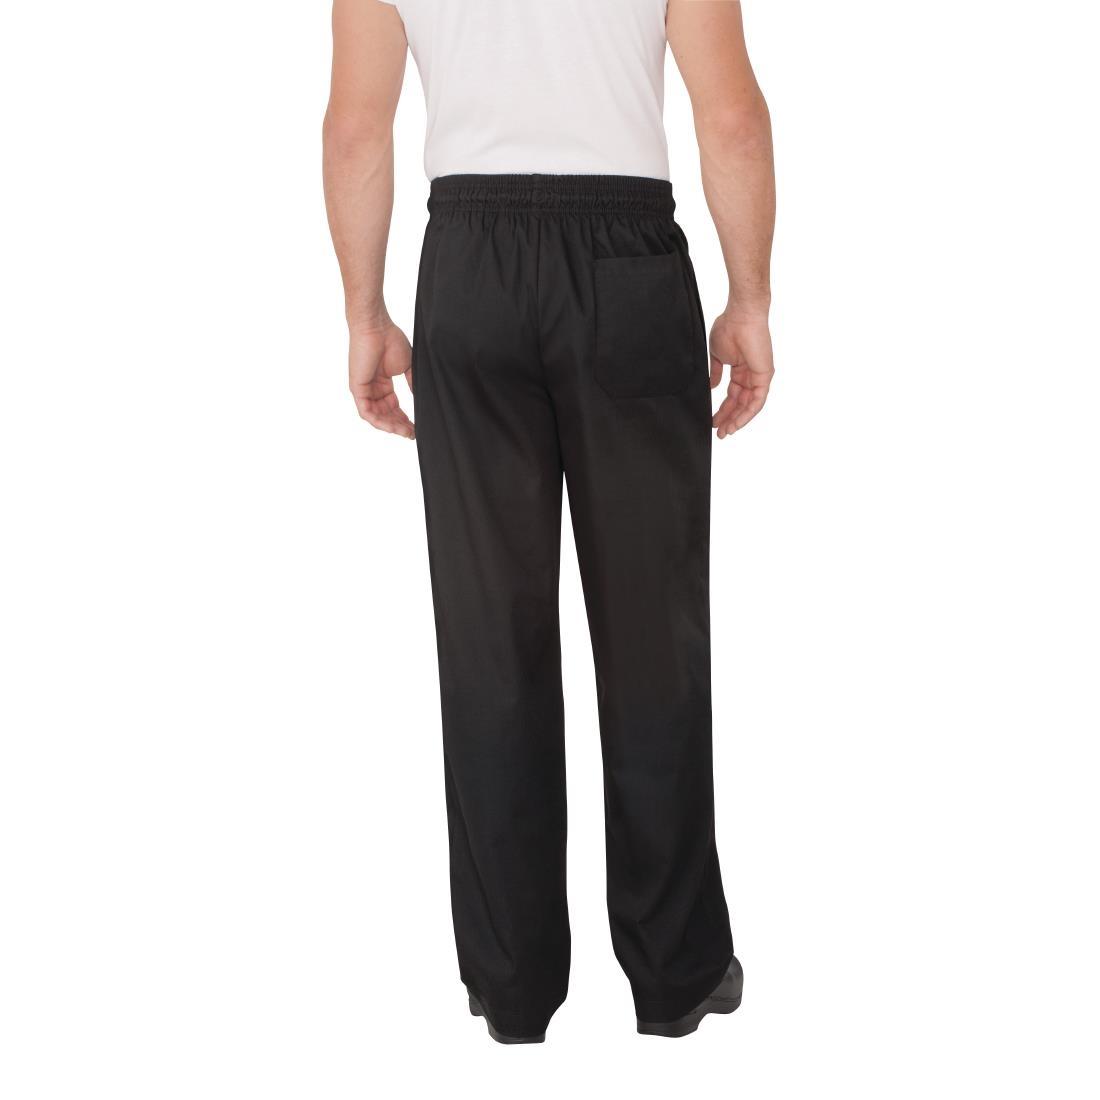 Chef Works Essential Baggy Trousers Black XS - A029-XS  - 5